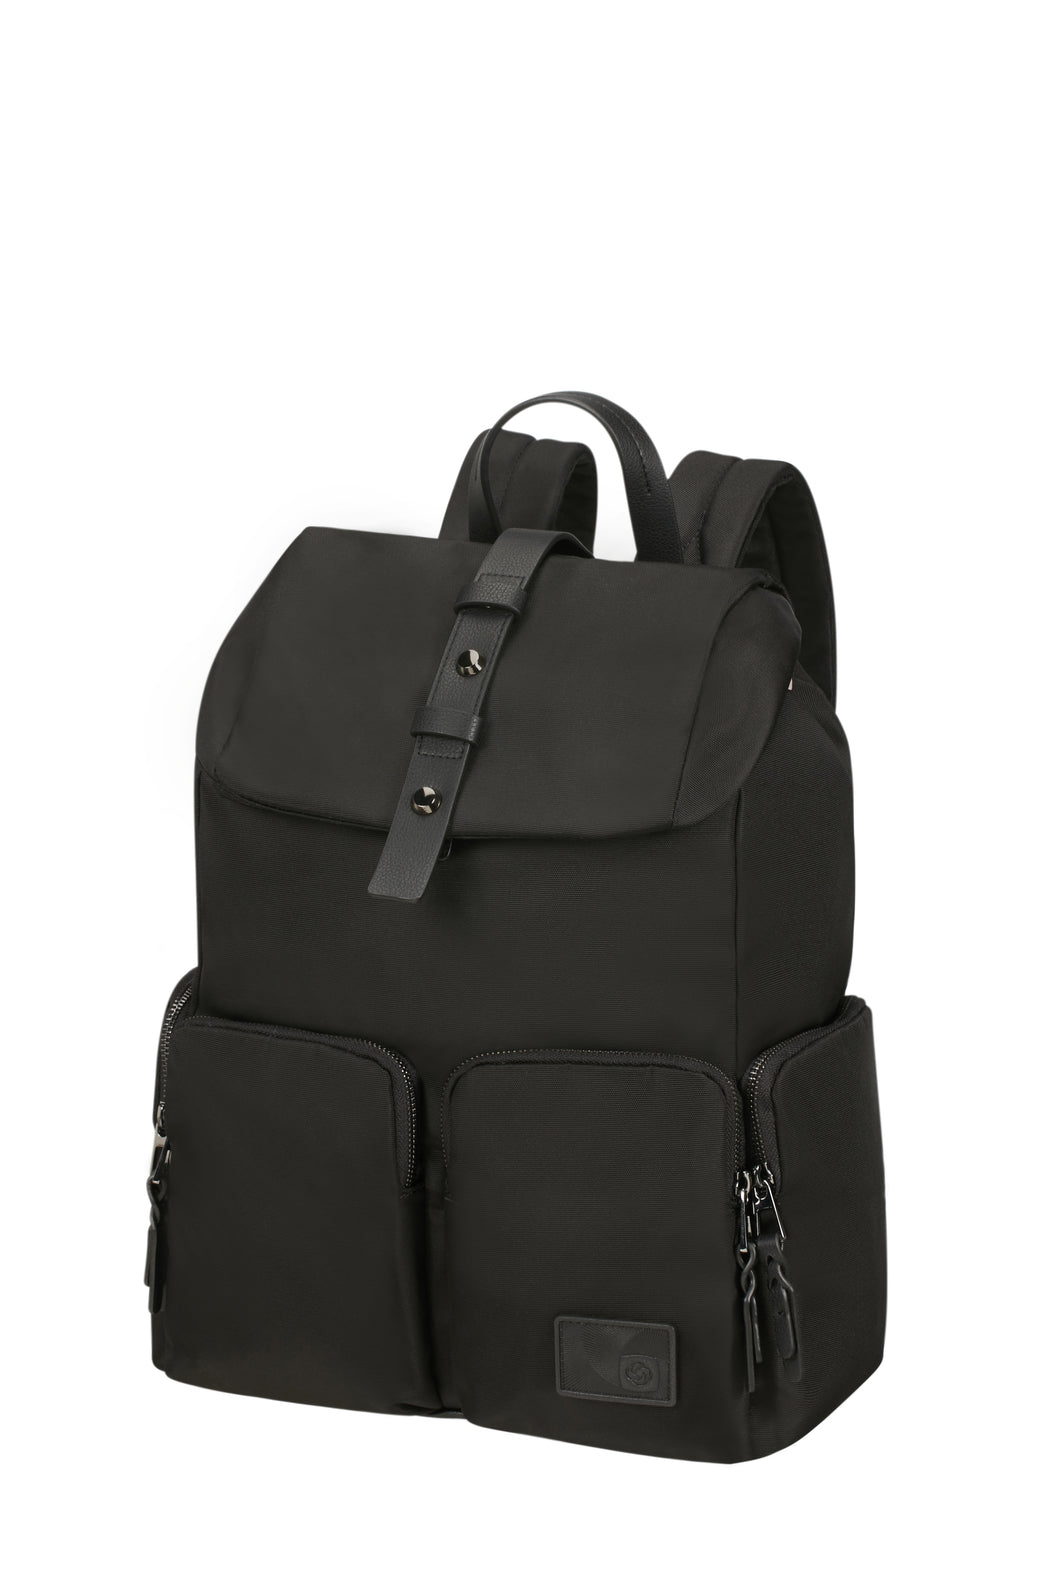 YOURBAN Laptop Backpack 14.1